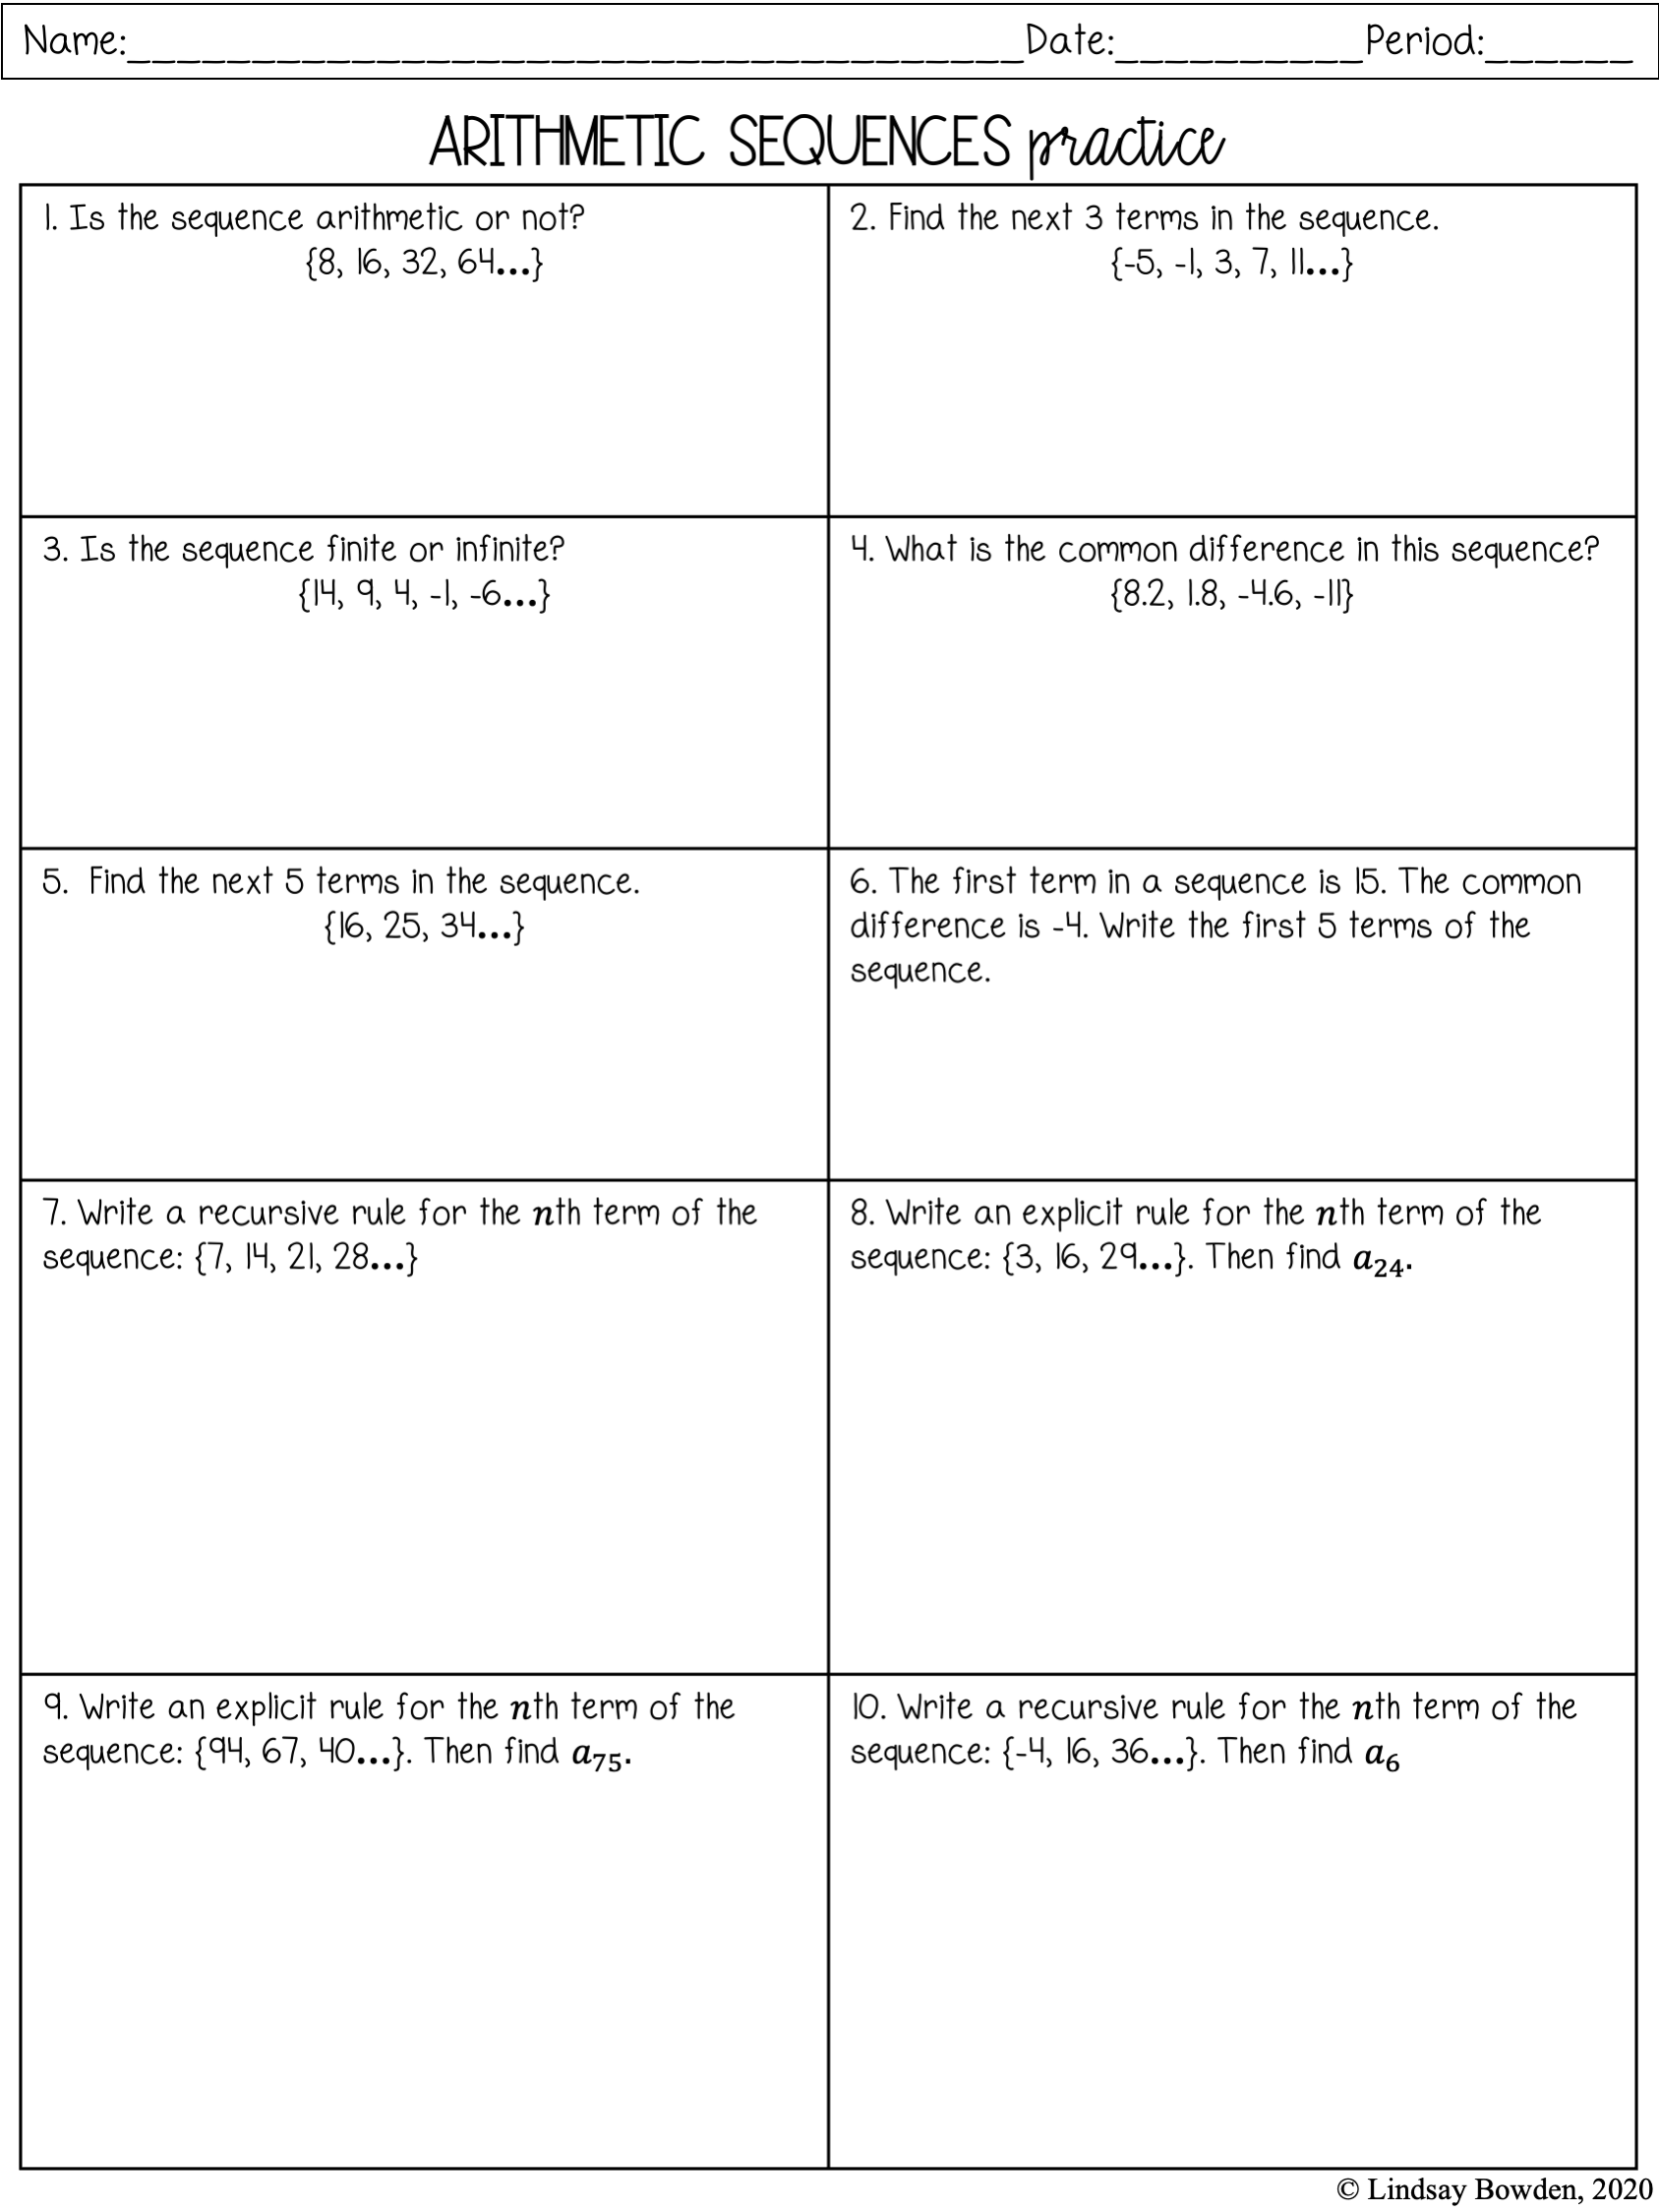 Arithmetic Sequences Notes and Worksheets - Lindsay Bowden With Arithmetic Sequence Worksheet Answers